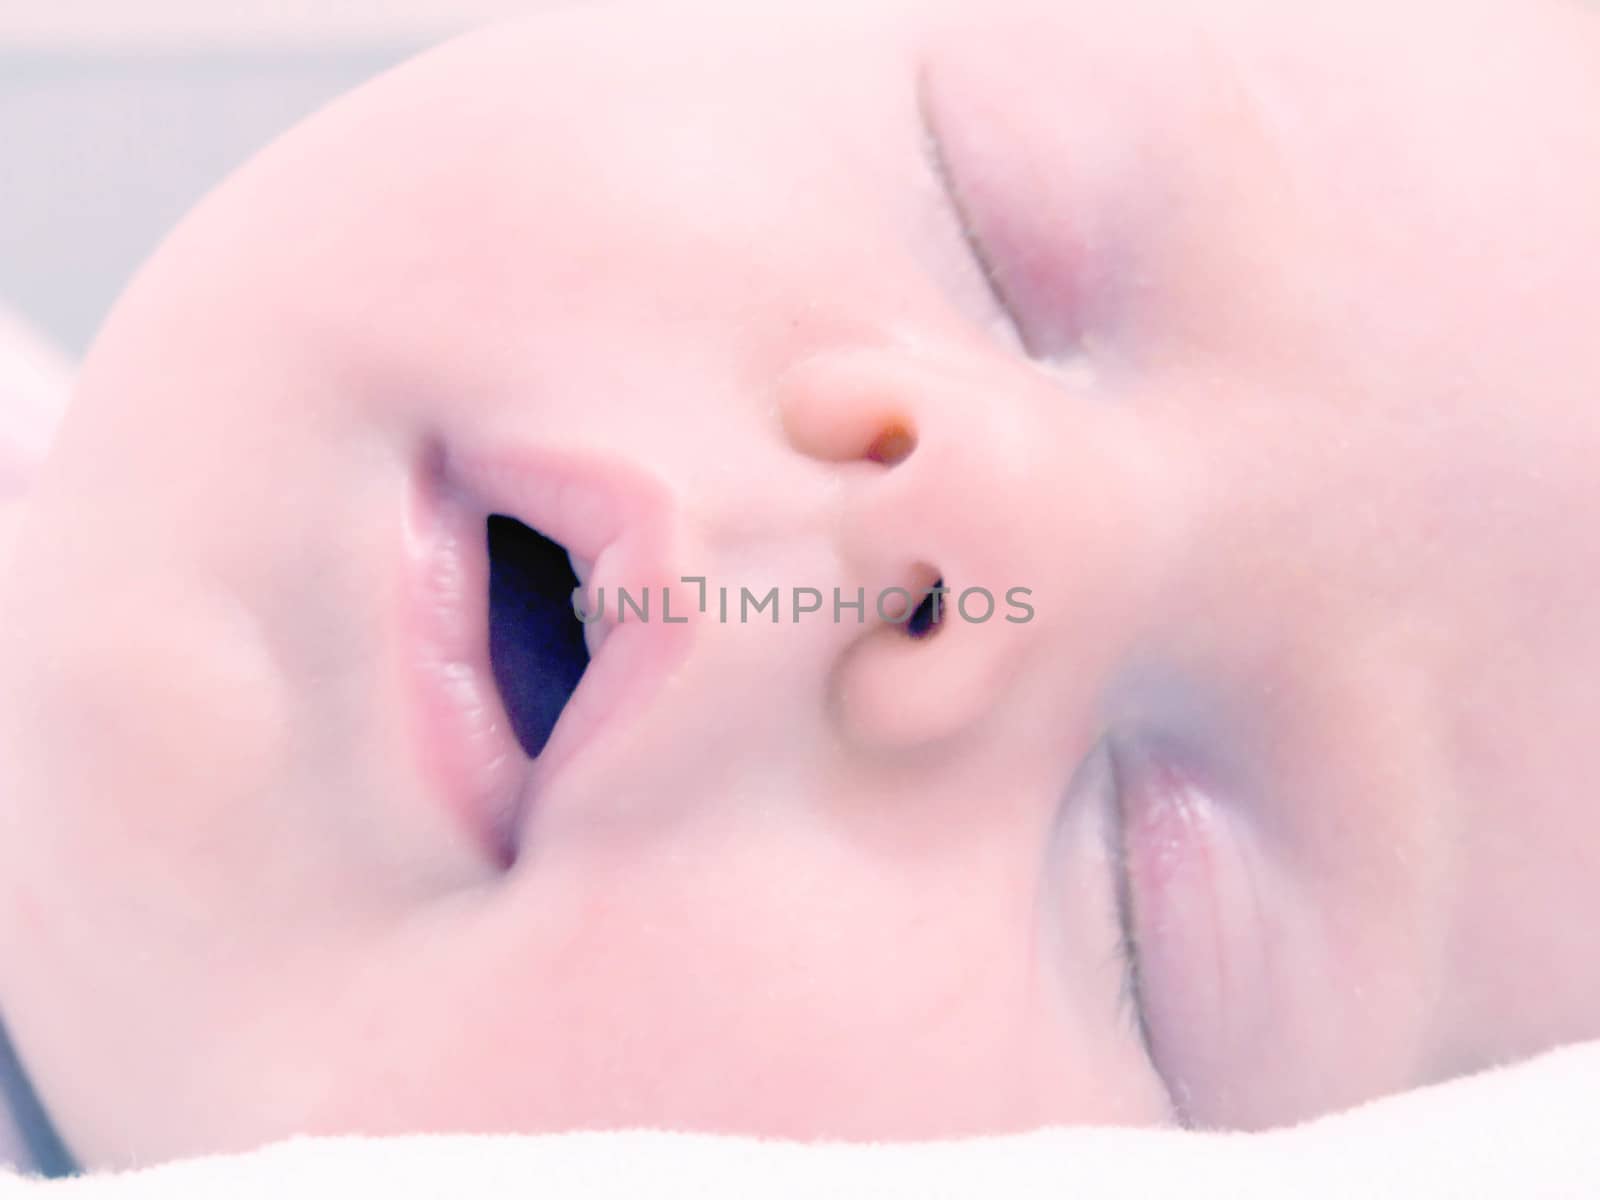 newborn baby sleeping by fadeinphotography